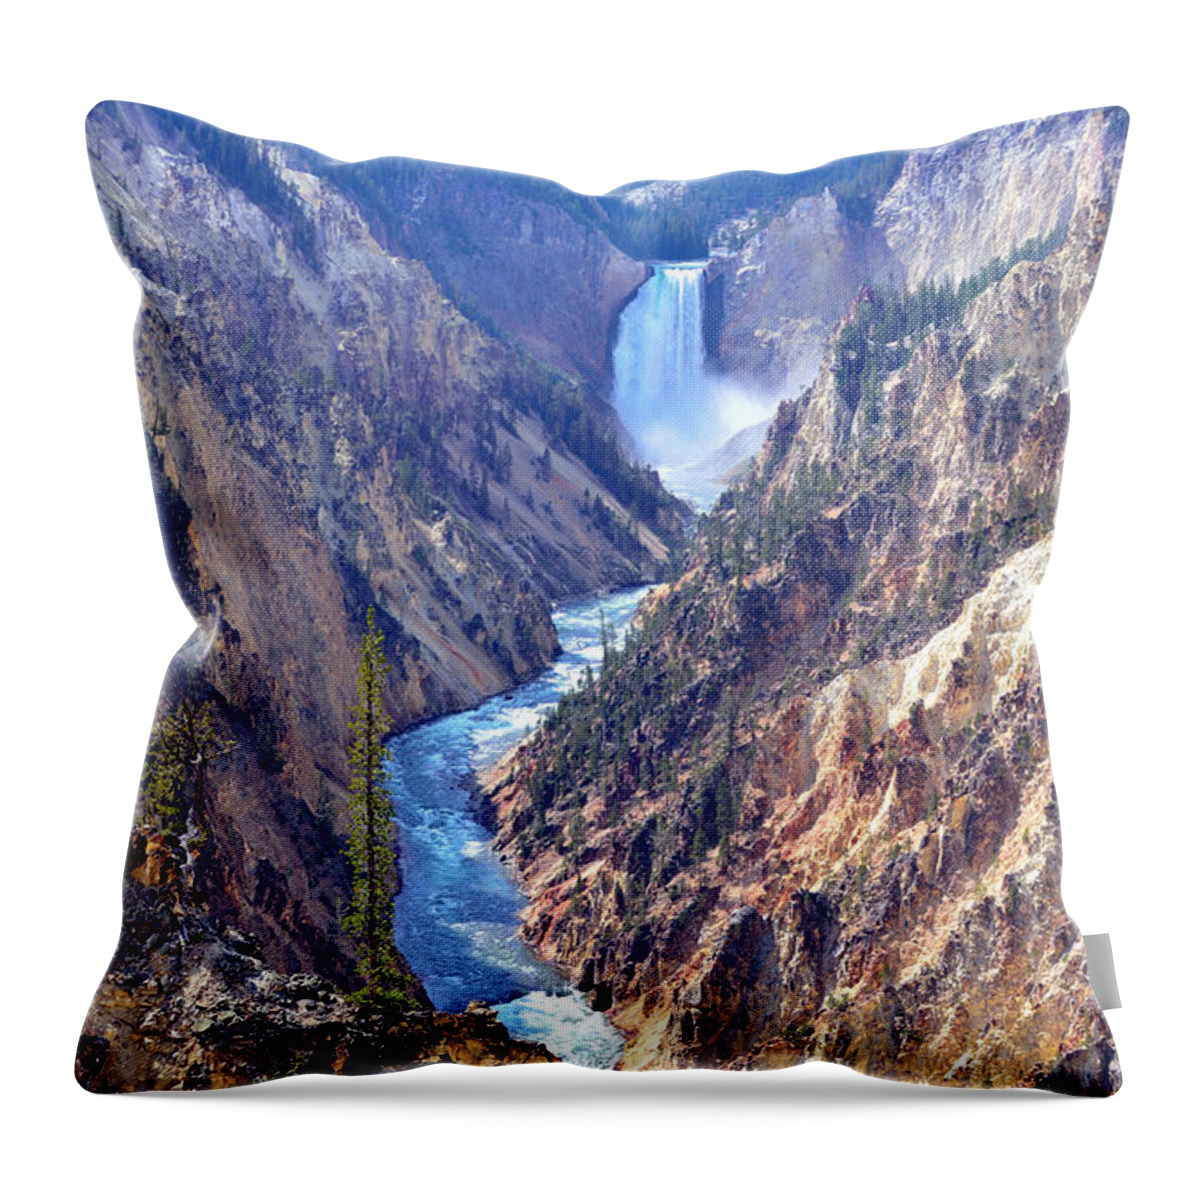 Lower Throw Pillow featuring the photograph Lower Yellowstone Falls by Tranquil Light Photography